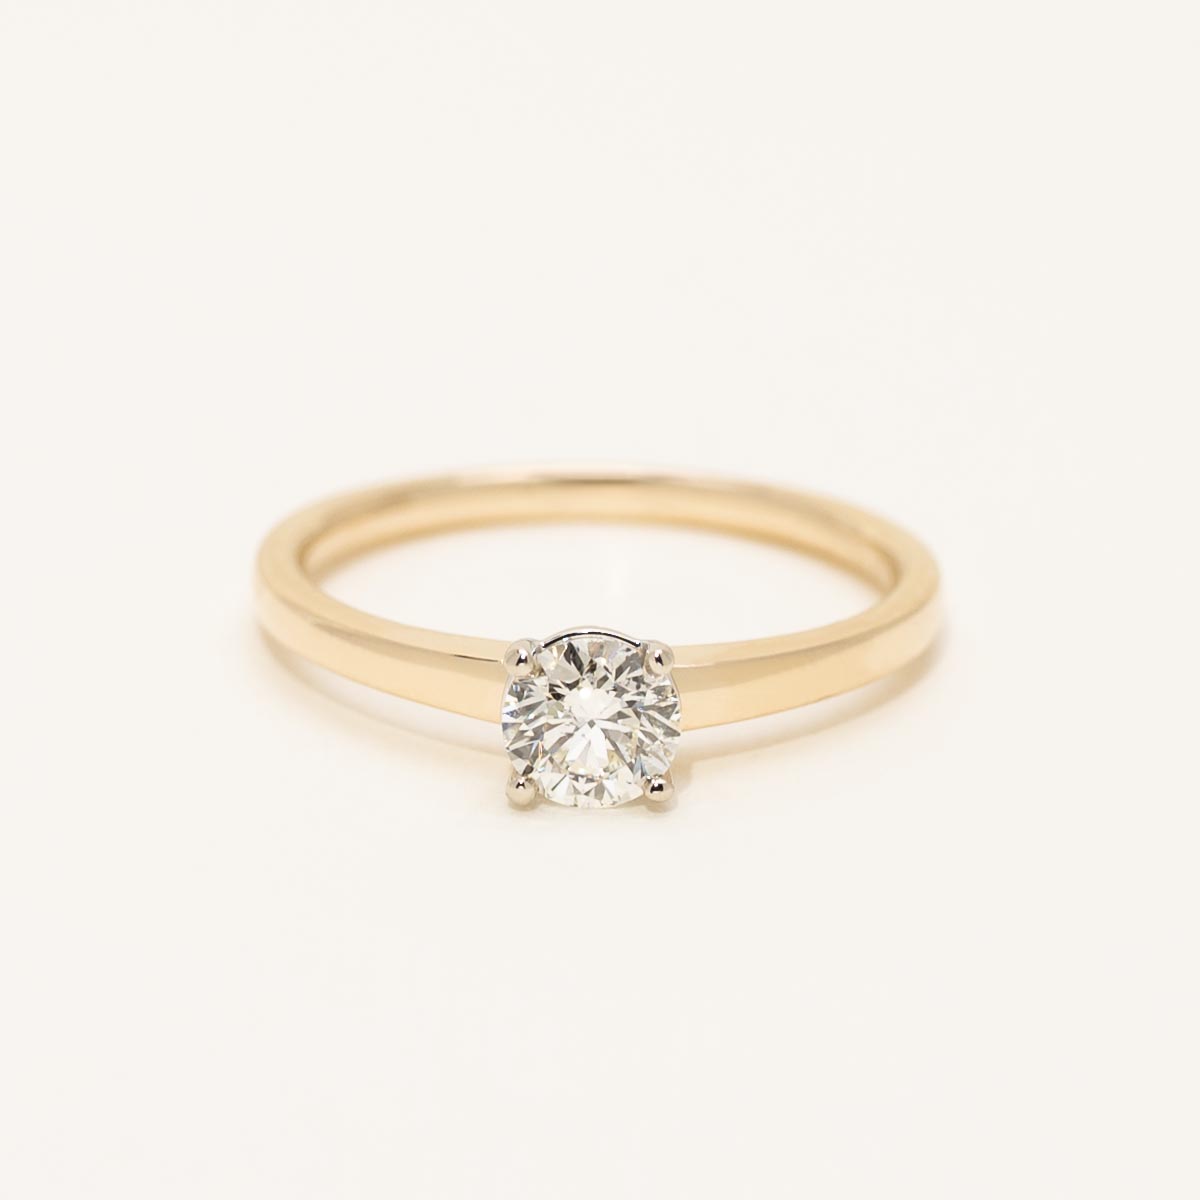 Diamond Solitaire Ring in 14kt Yellow Gold (1/2ct)